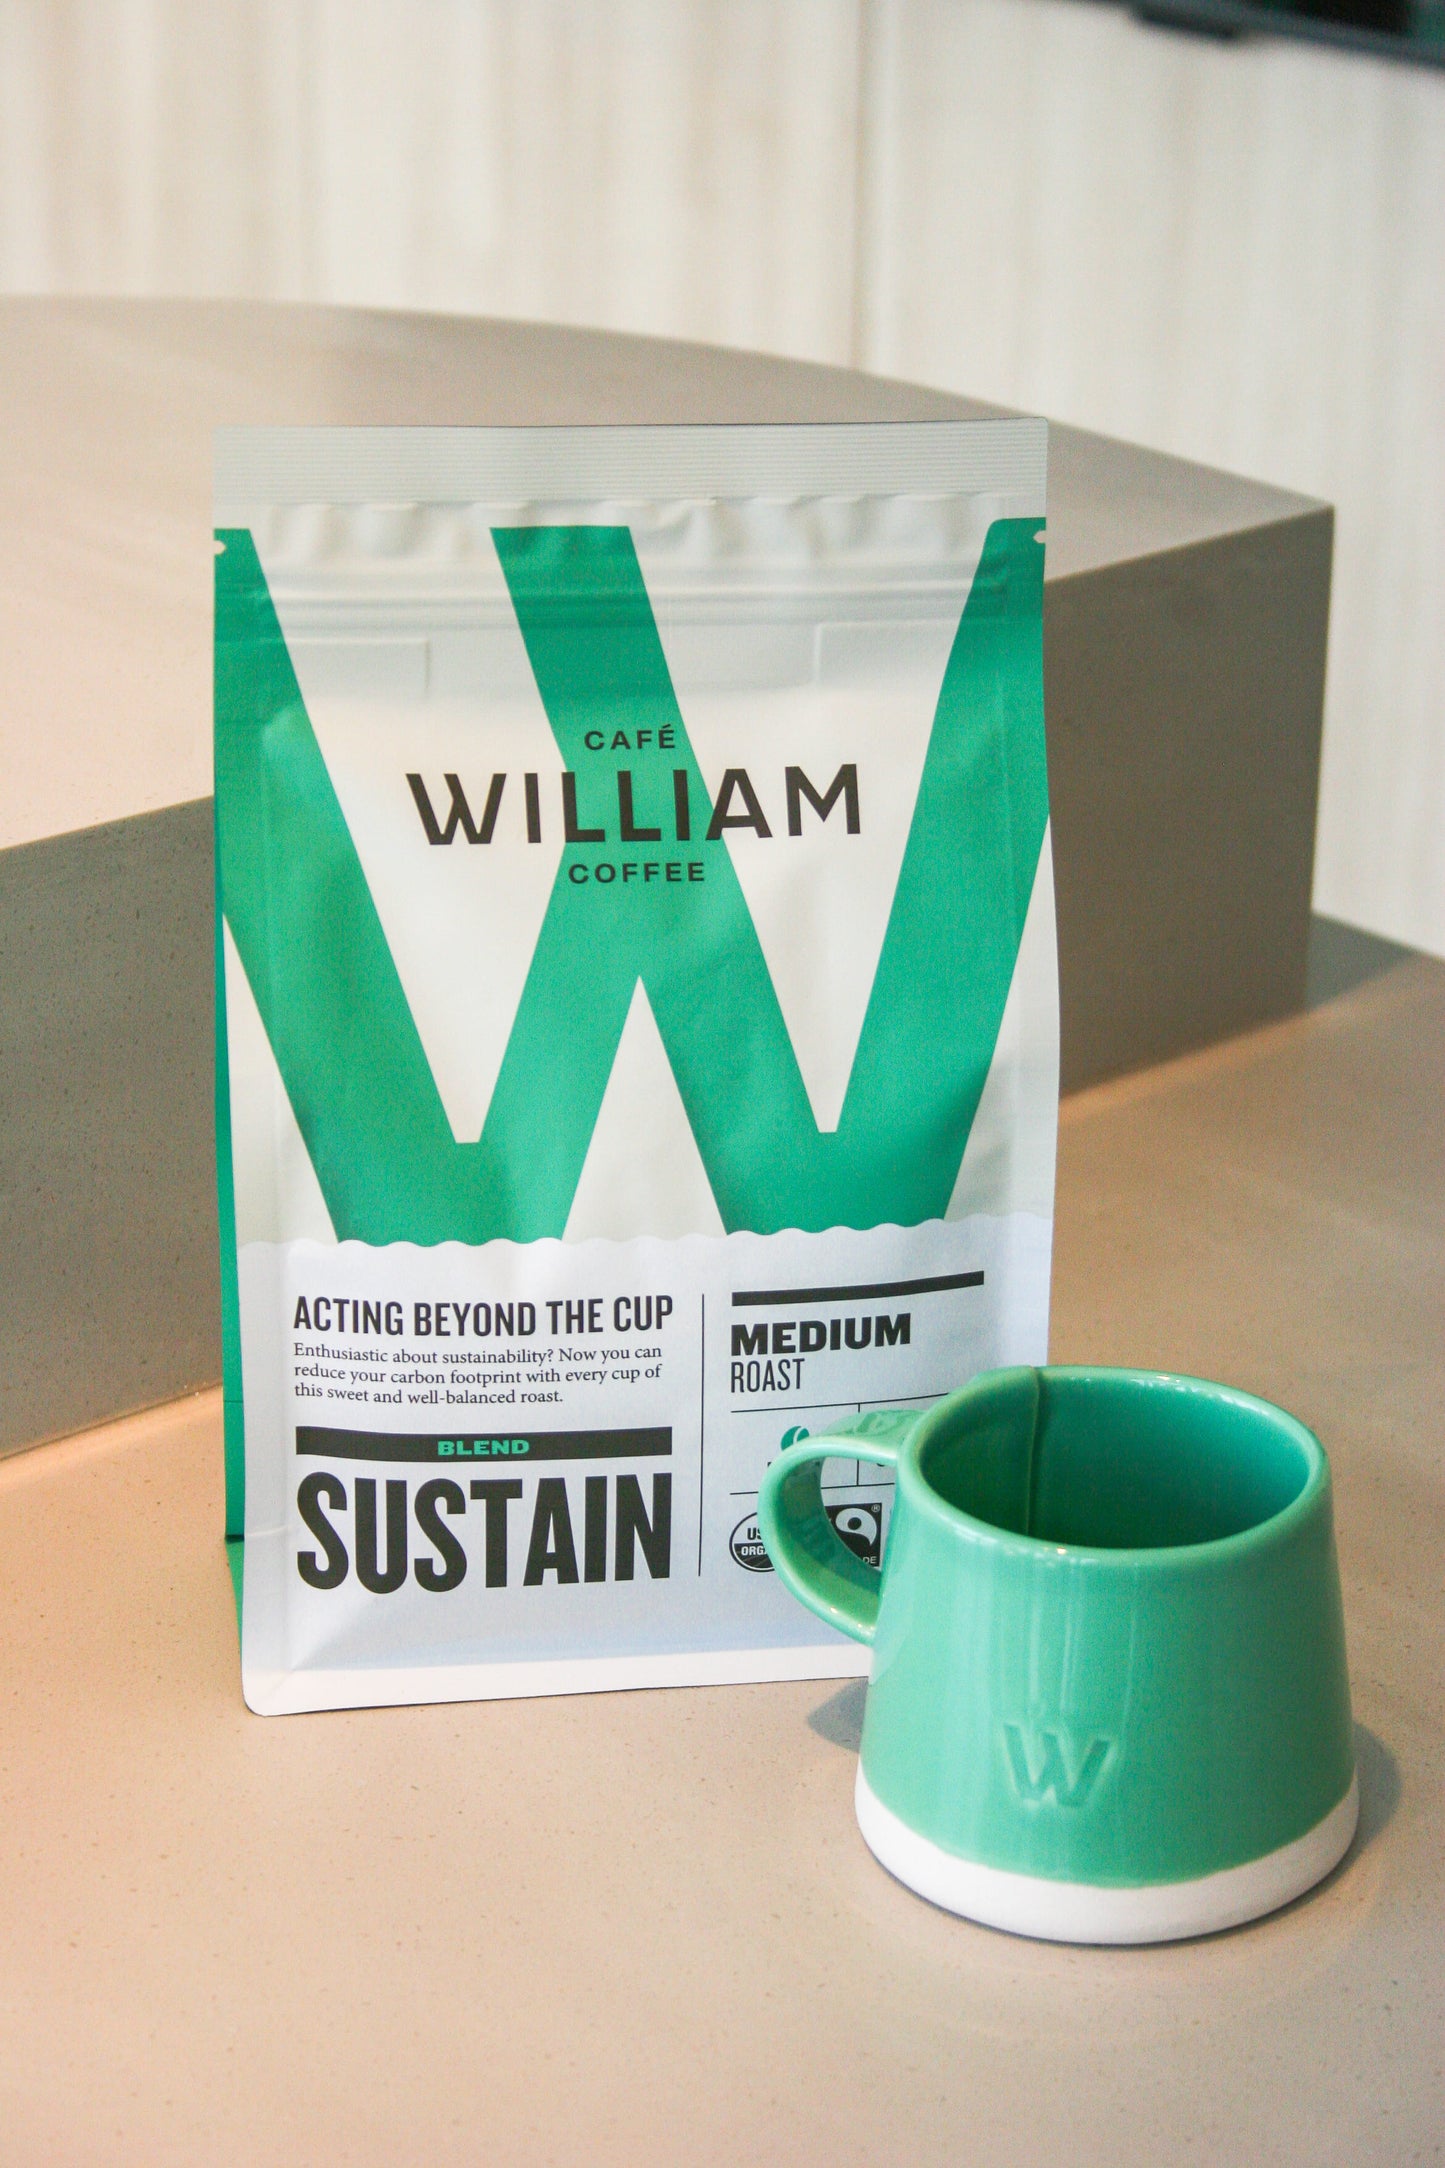 Sustain coffee and Atelier Make porcelain coffee cup set